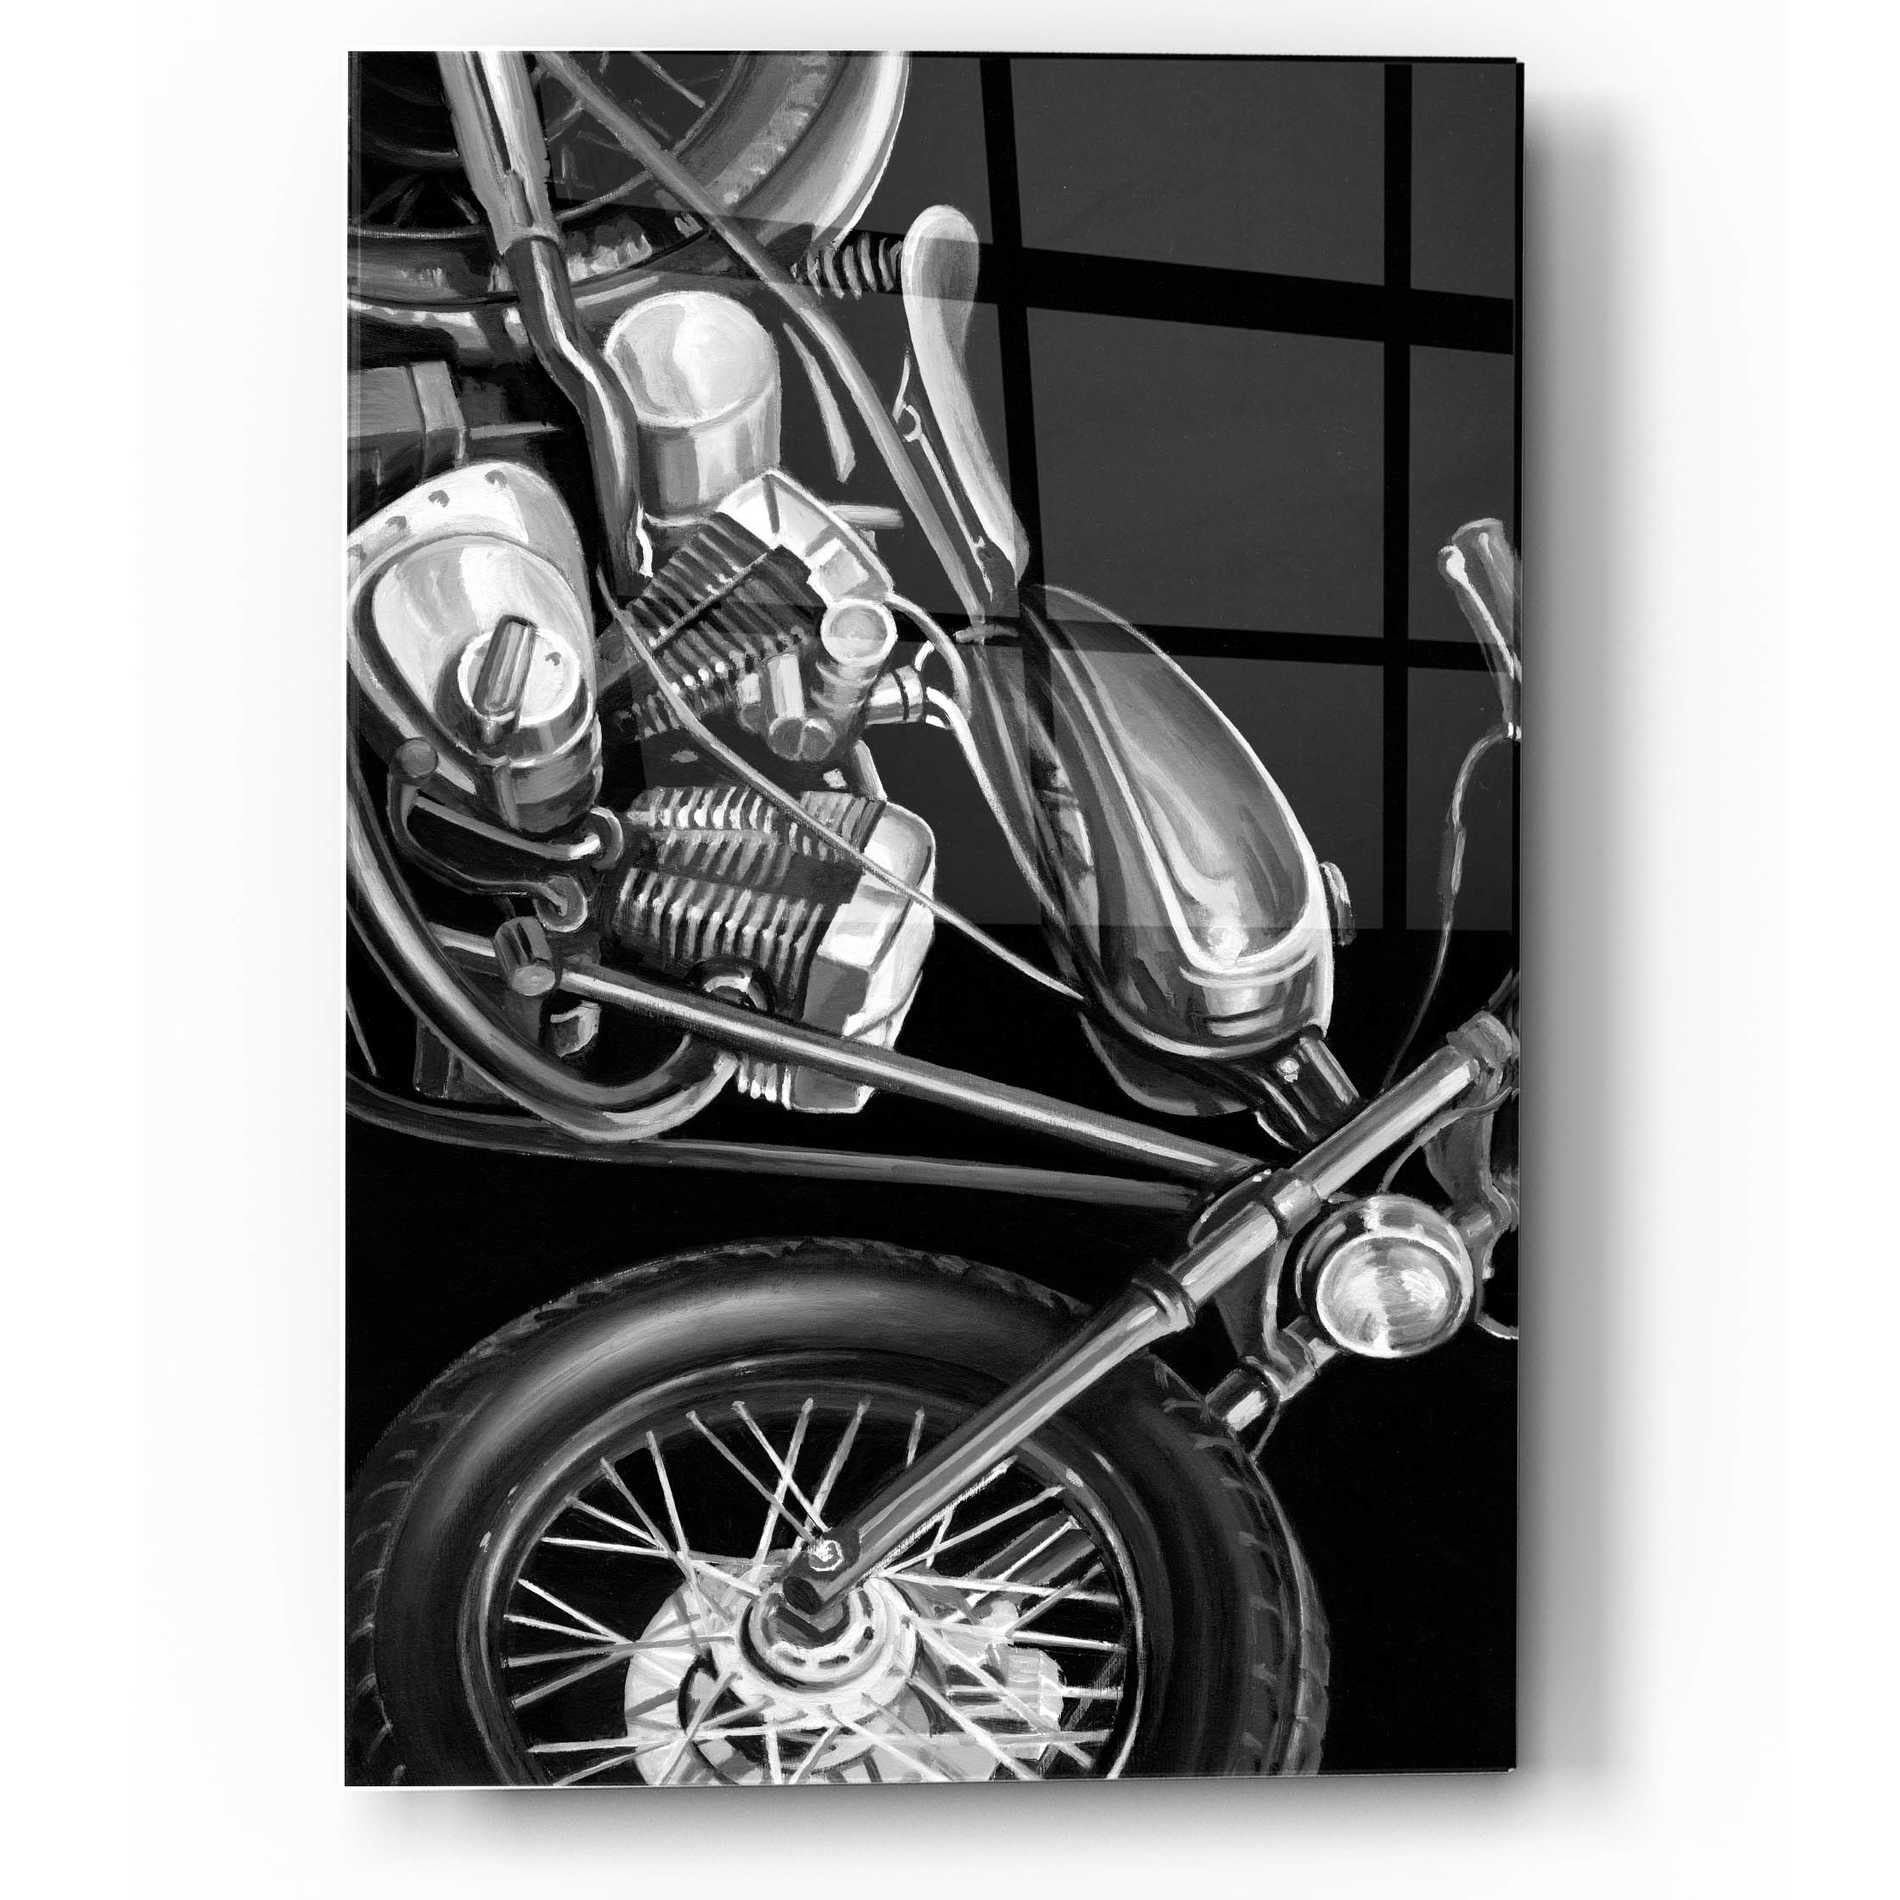 Epic Art 'Vintage Motorcycle I' by Ethan Harper, Acrylic Glass Wall Art,12x16